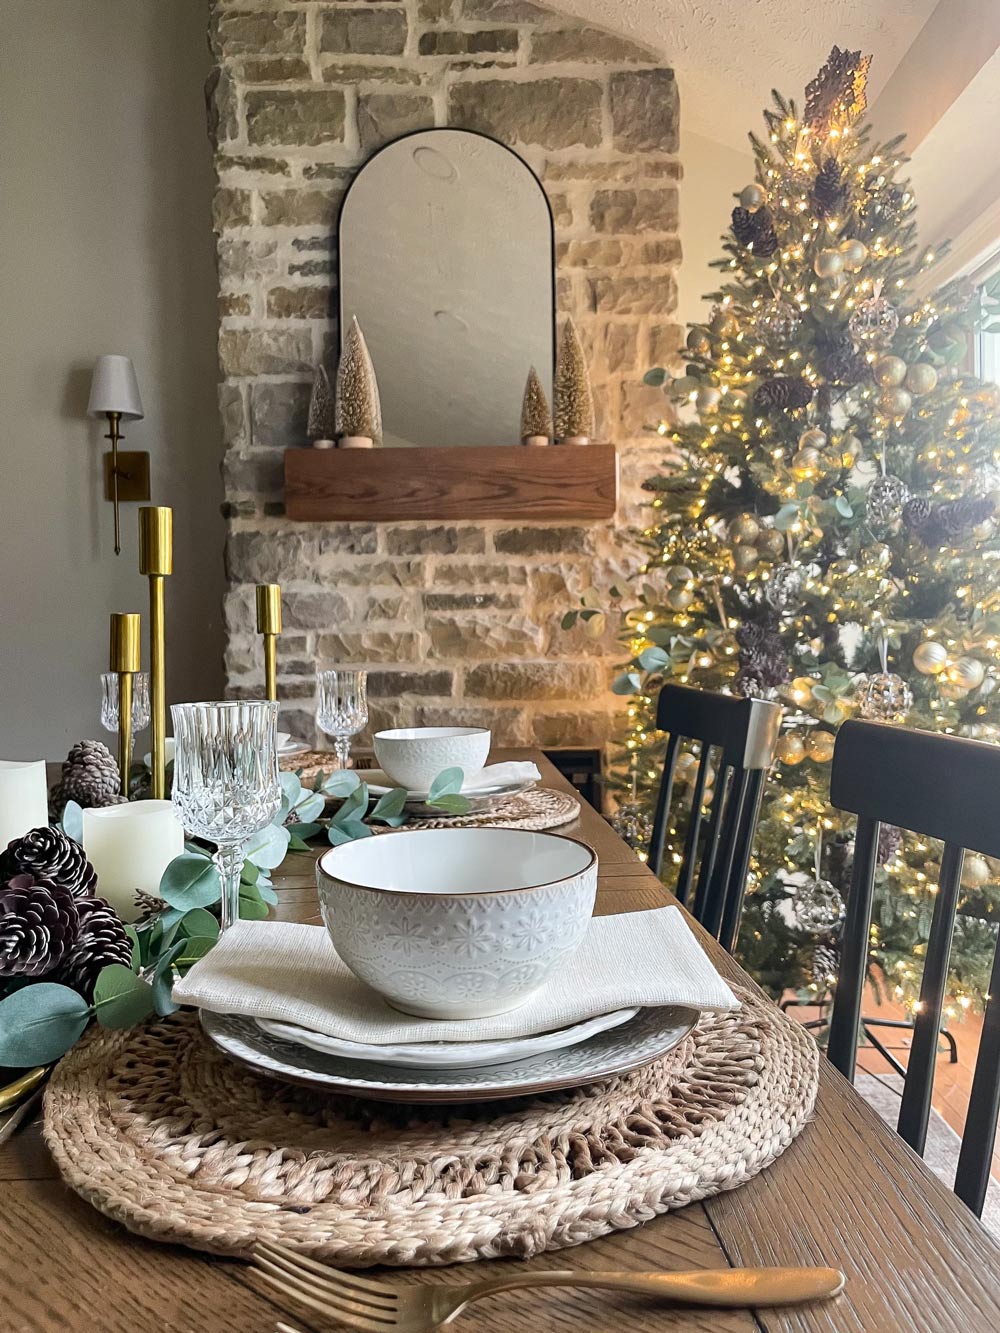 Dining room with dinnerware and Christmas tree in the background.